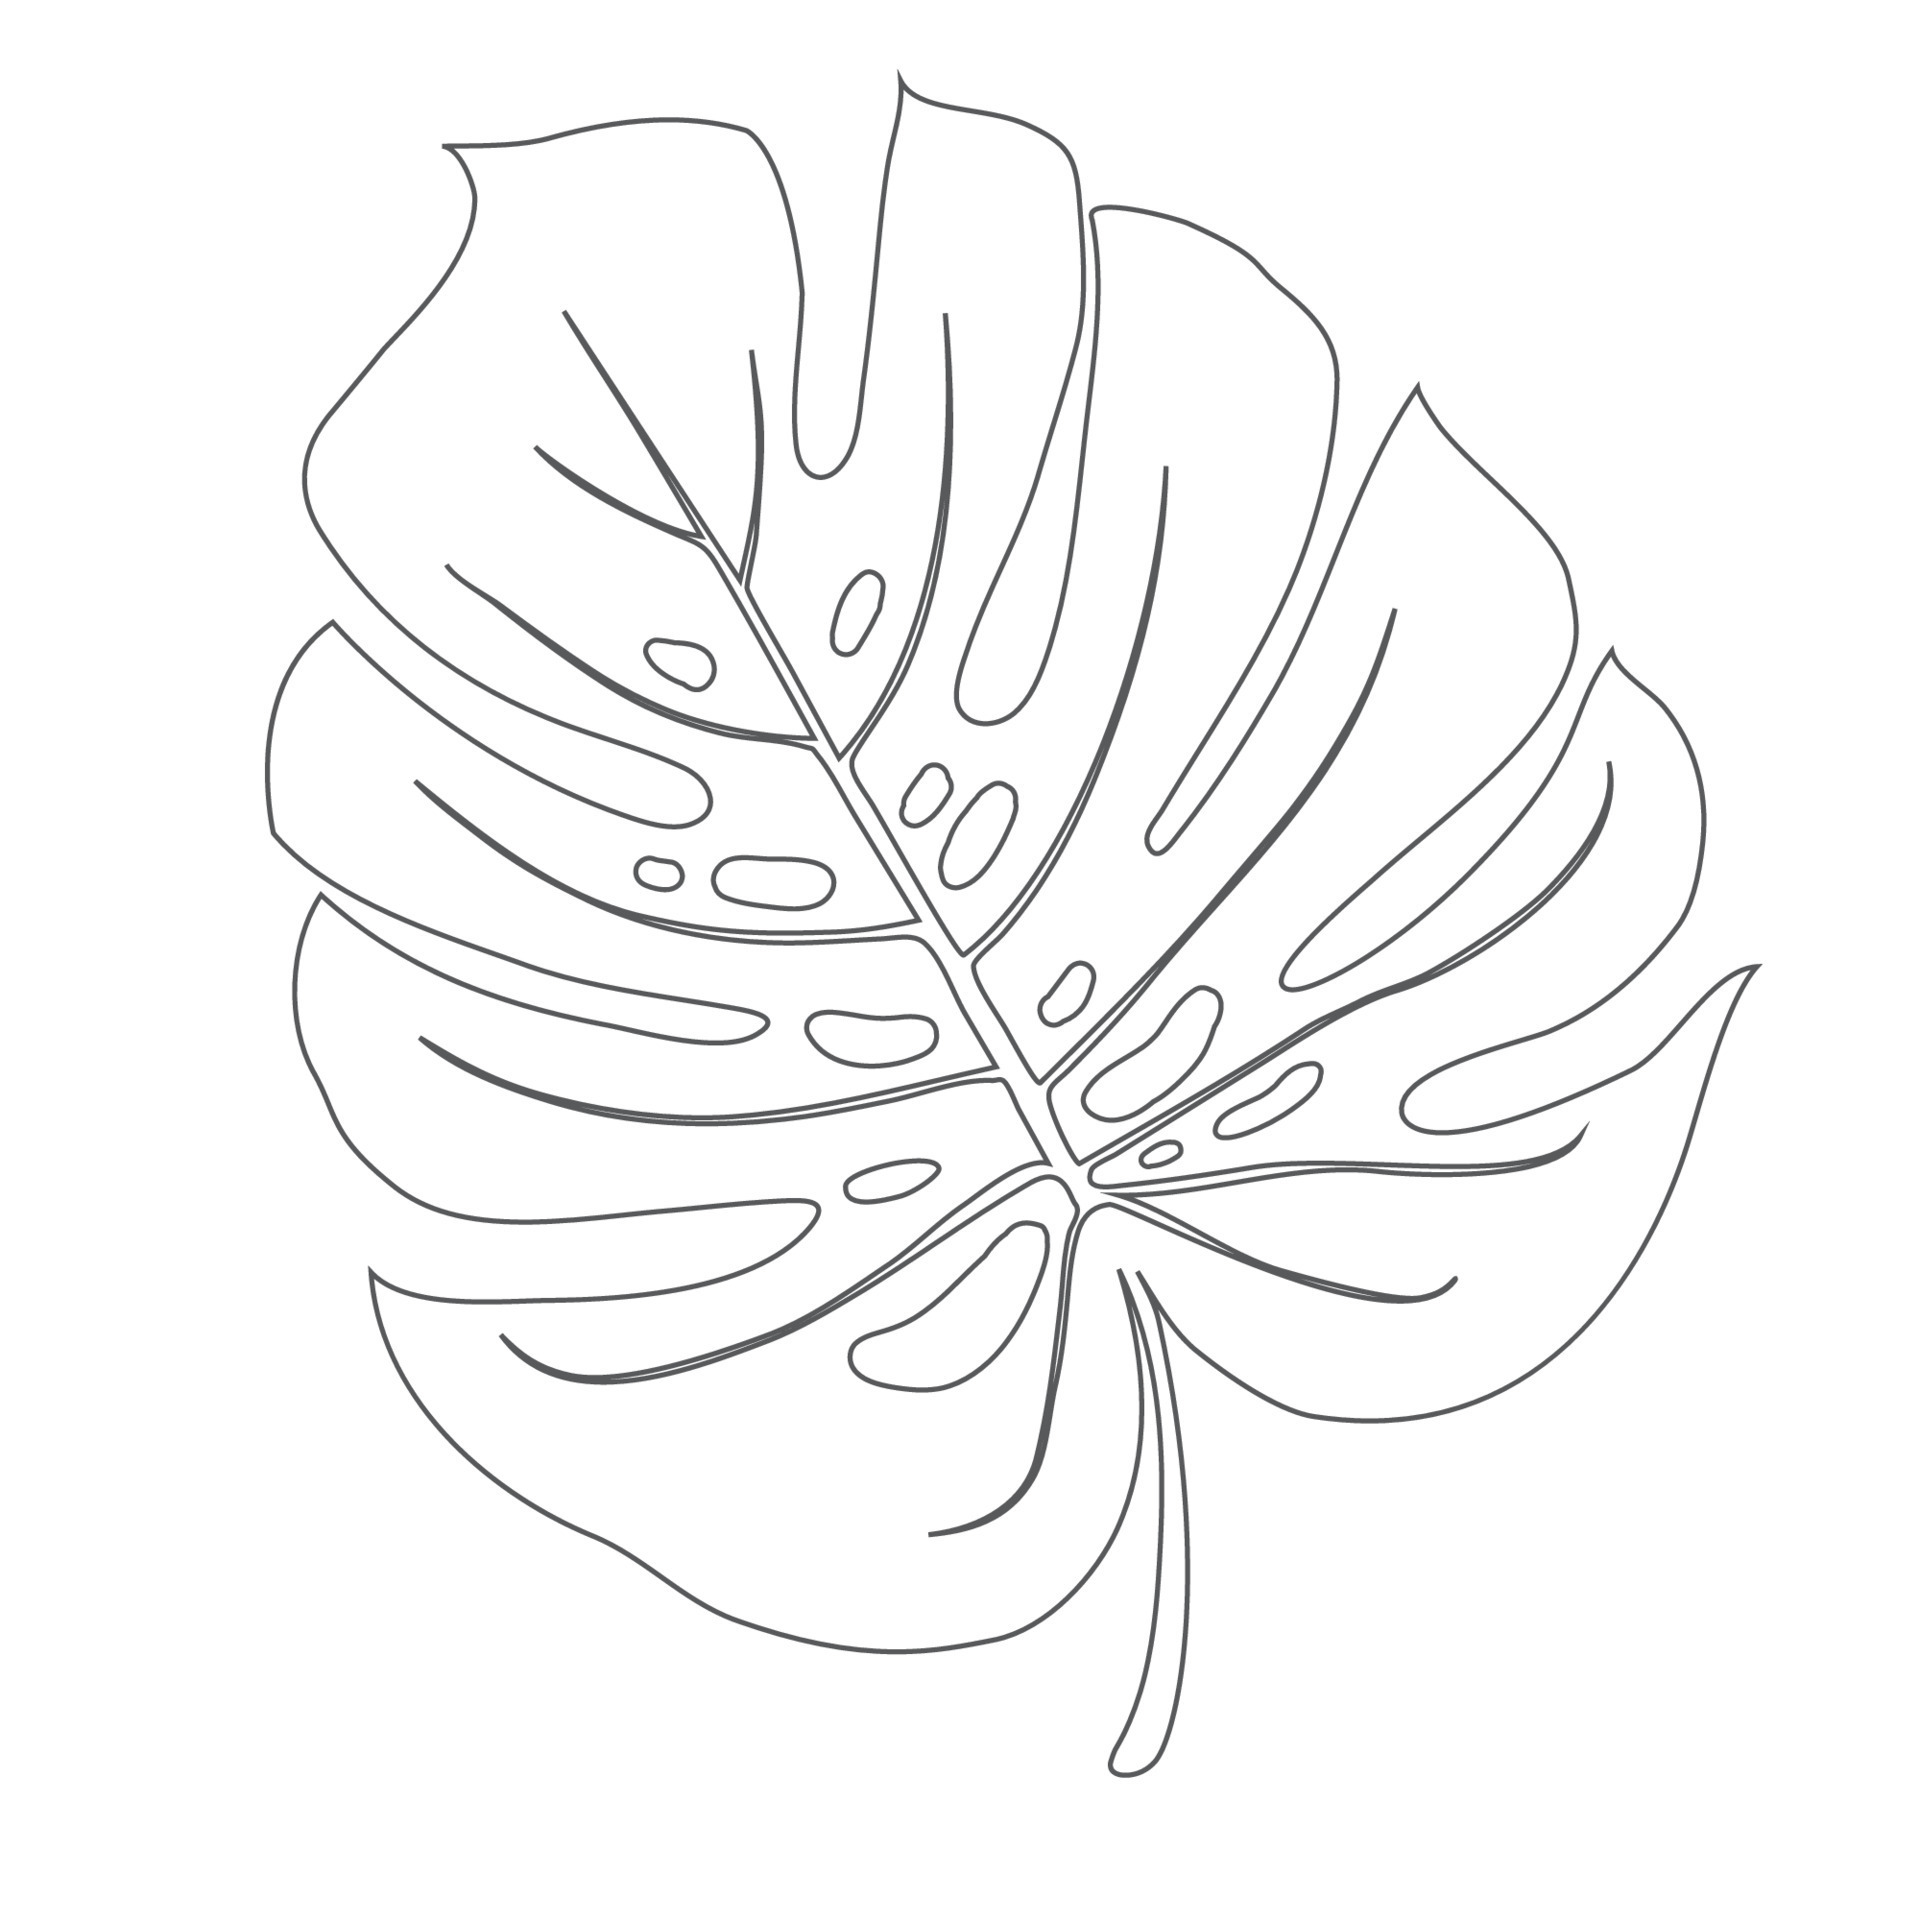 Monstera Deliciosa plant leaf from tropical forests isolated. Vector ...